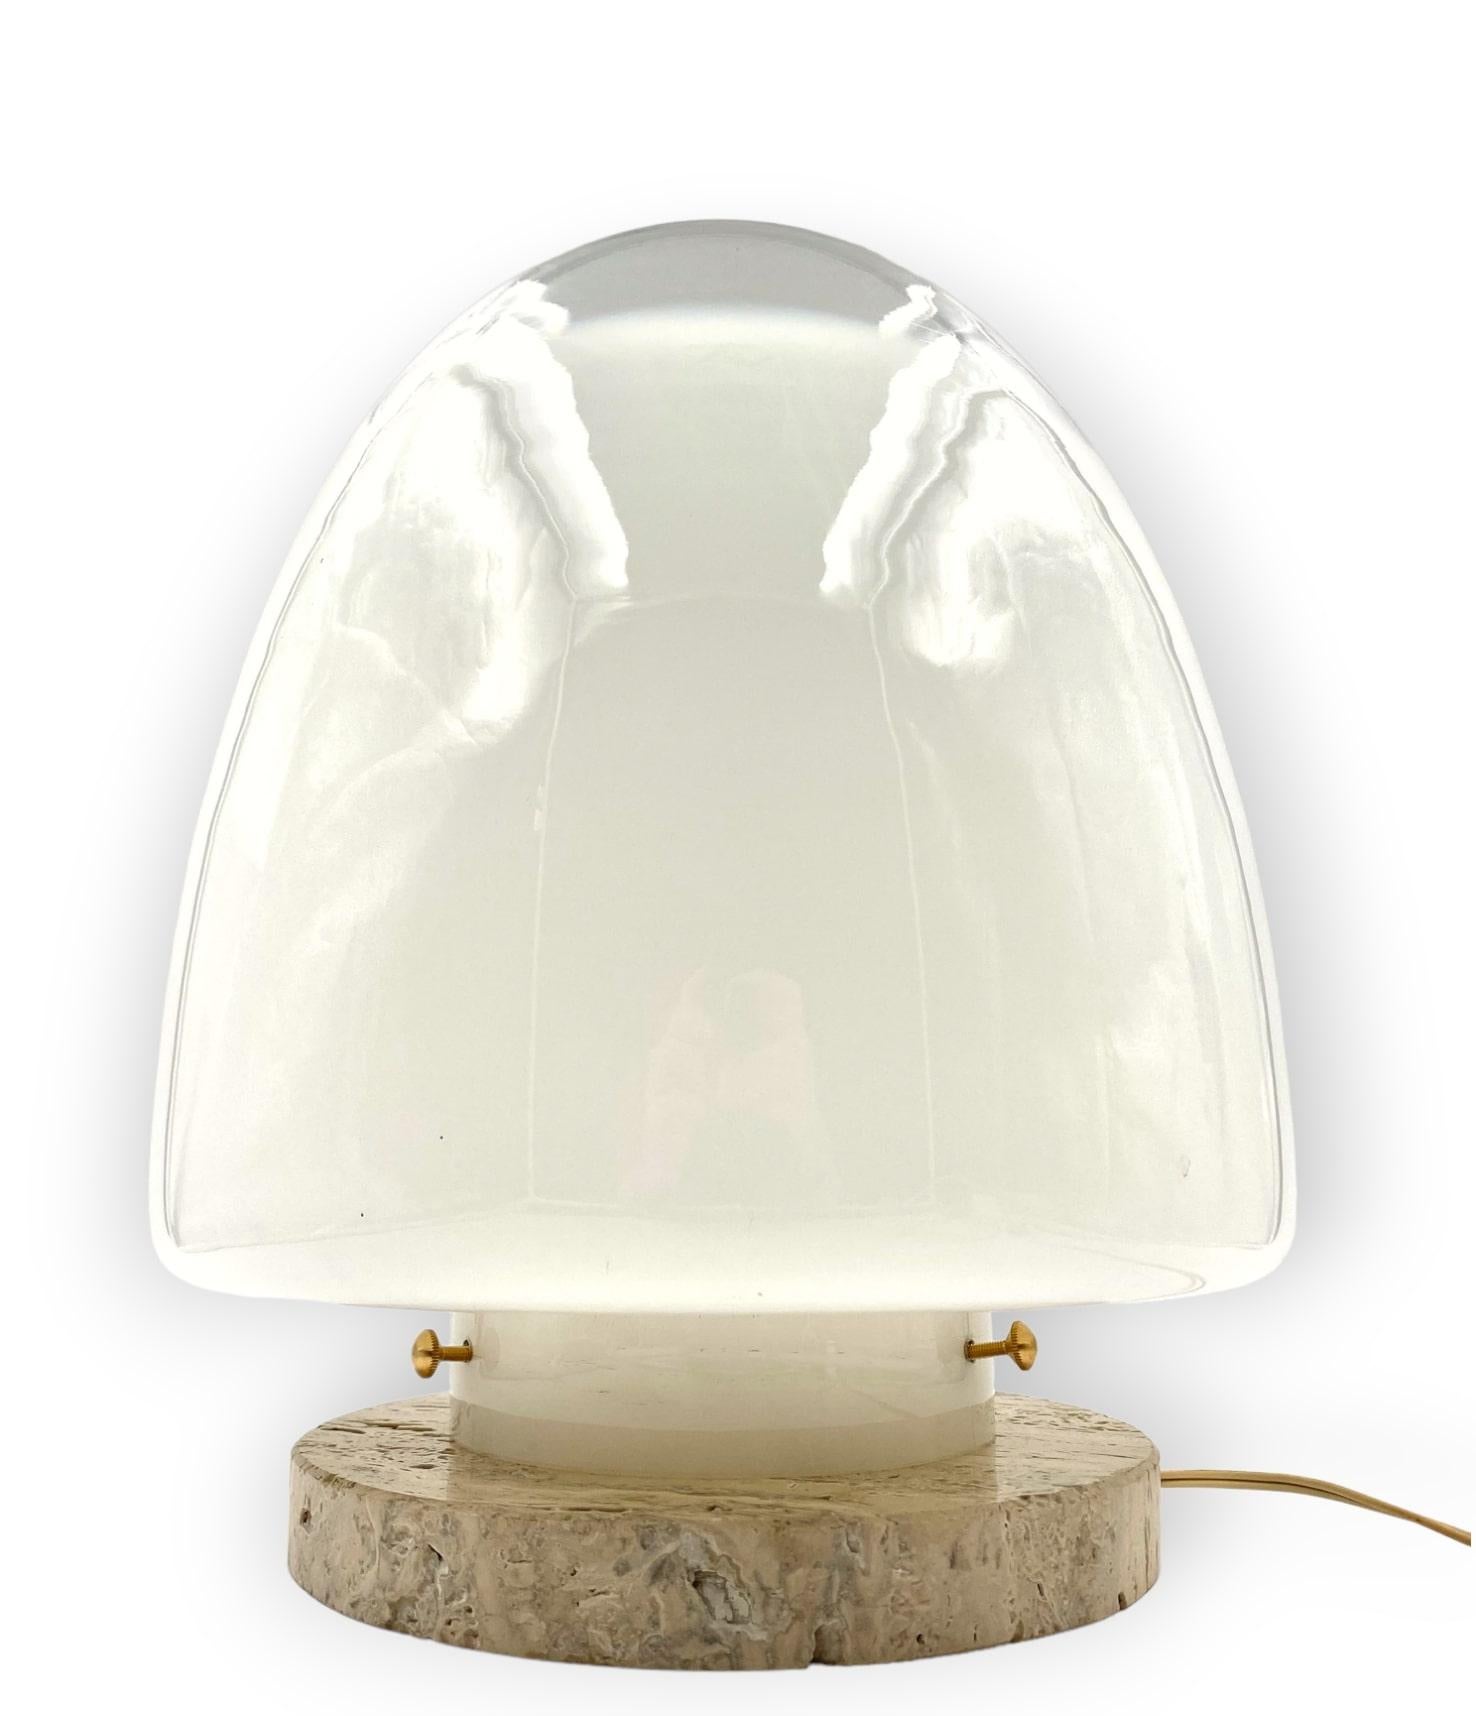 Giusto Toso Murano Art Glass and Travertine Table Lamp, Leucos, Italy, 1970s For Sale 2